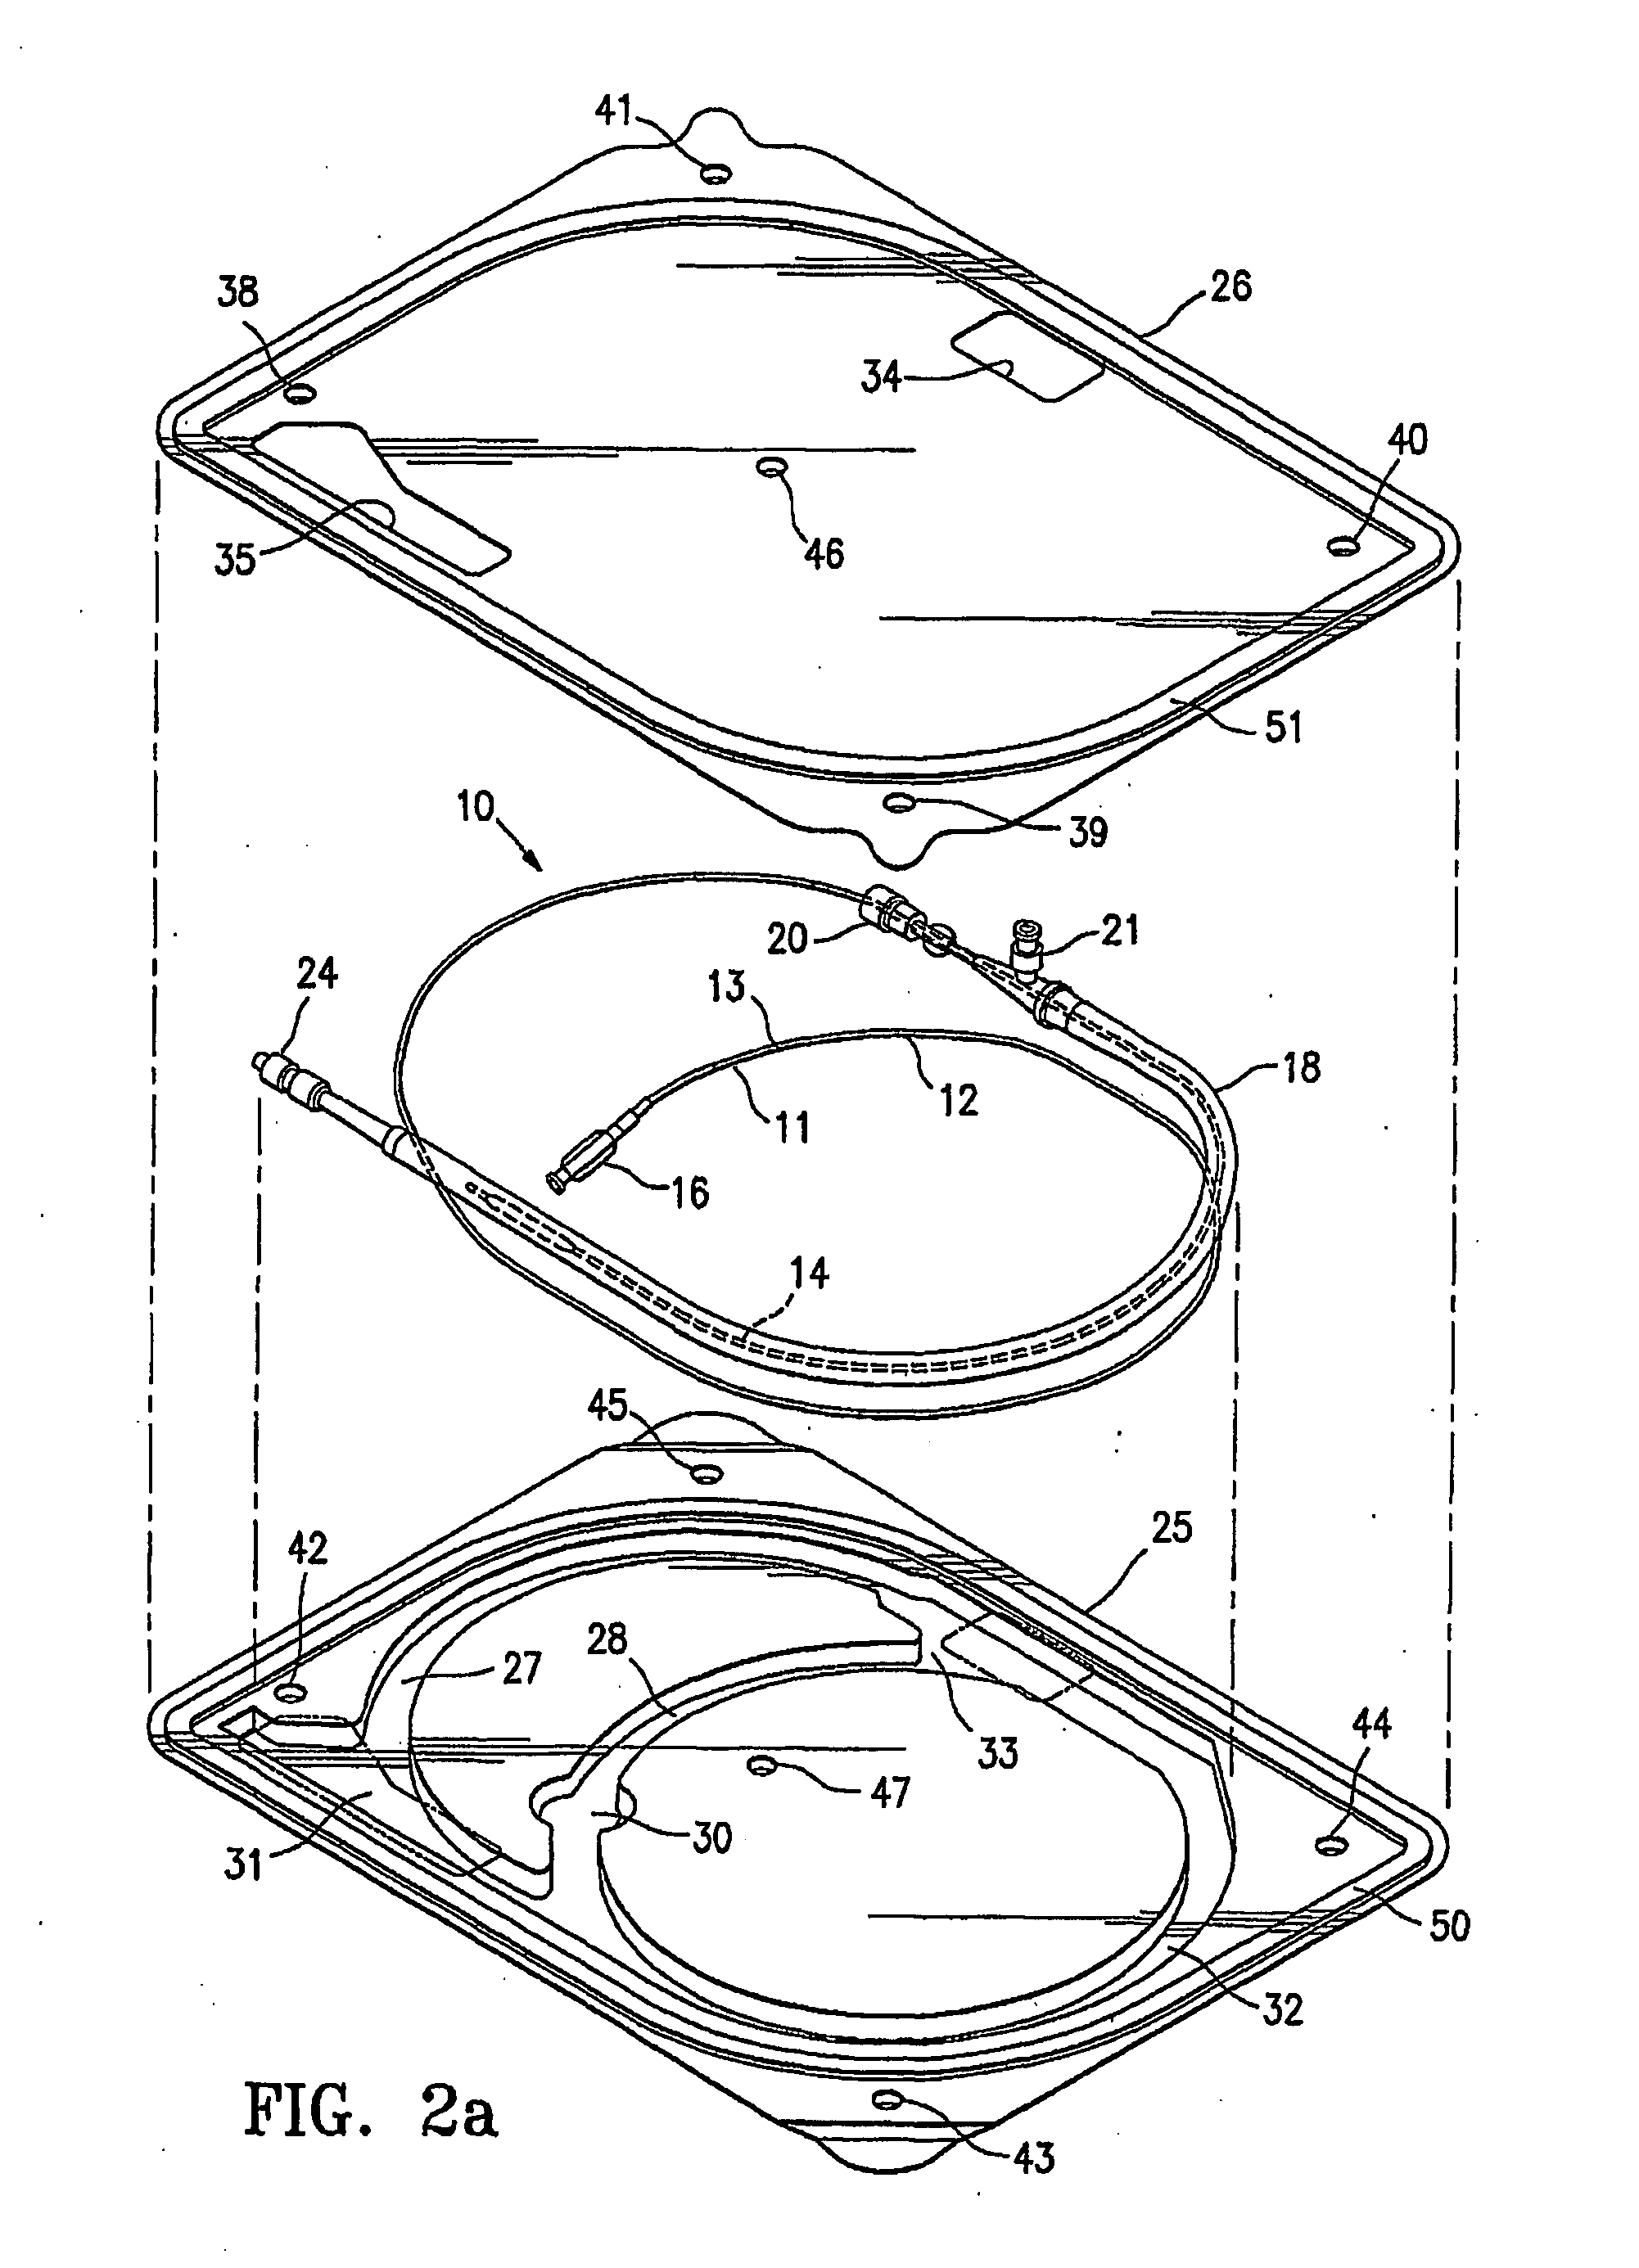 Protected Stent Delivery System and Packaging